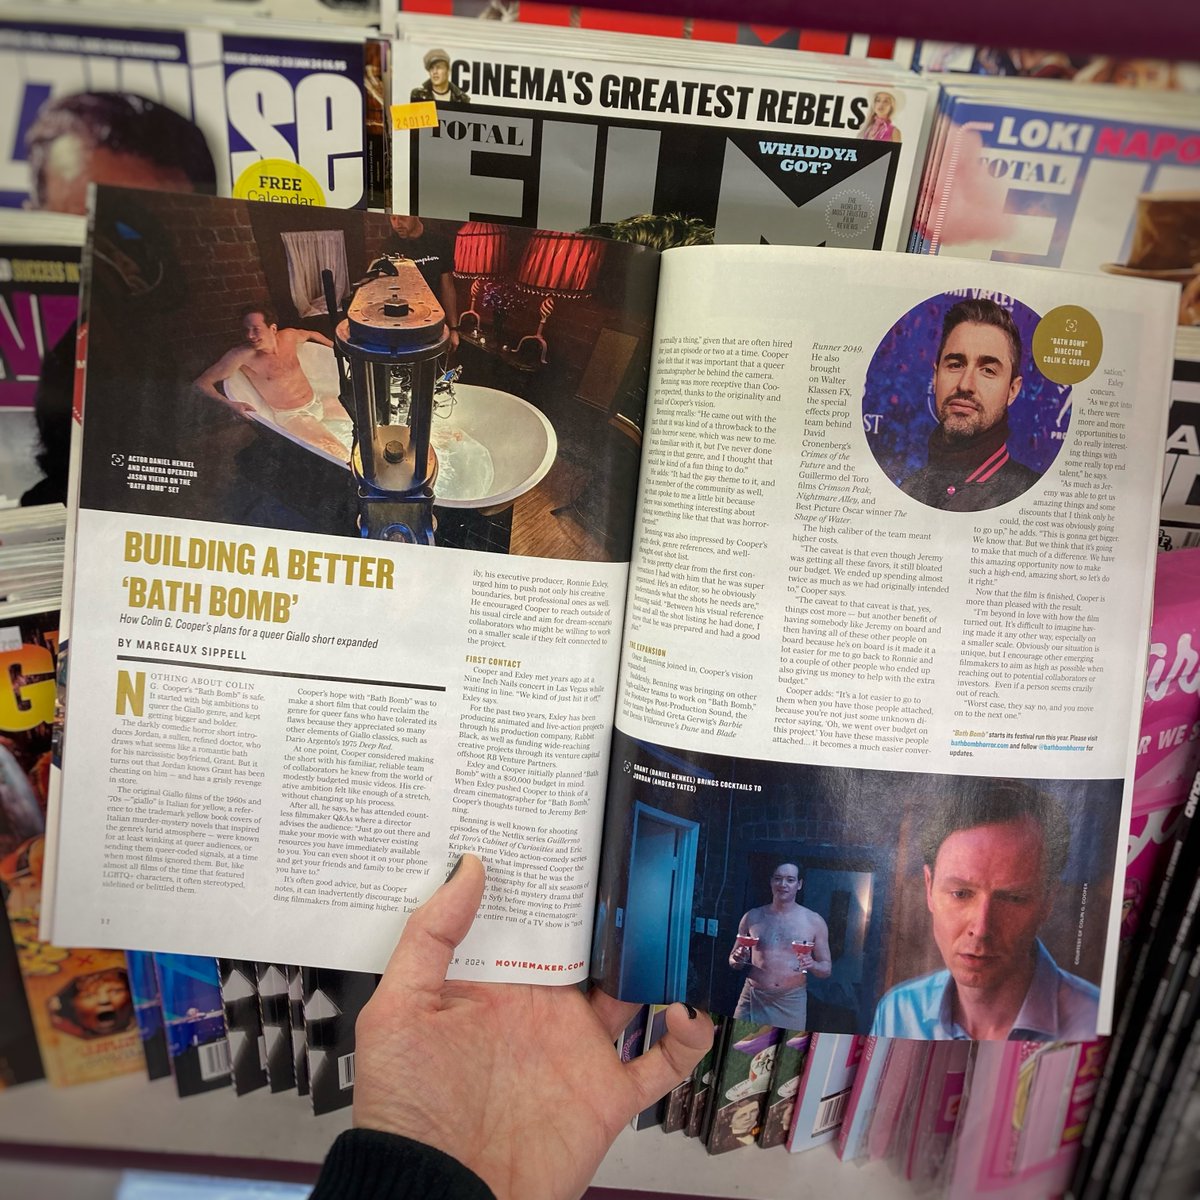 Bath Bomb News! We’re in the new edition of @moviemakermag 😱 Grab a copy and read about how our initially modest expectations snowballed into assembling a team of dream collaborators. Many thanks to Tim, Deirdre, Margeaux, and the rest of the team at MovieMaker 🖤